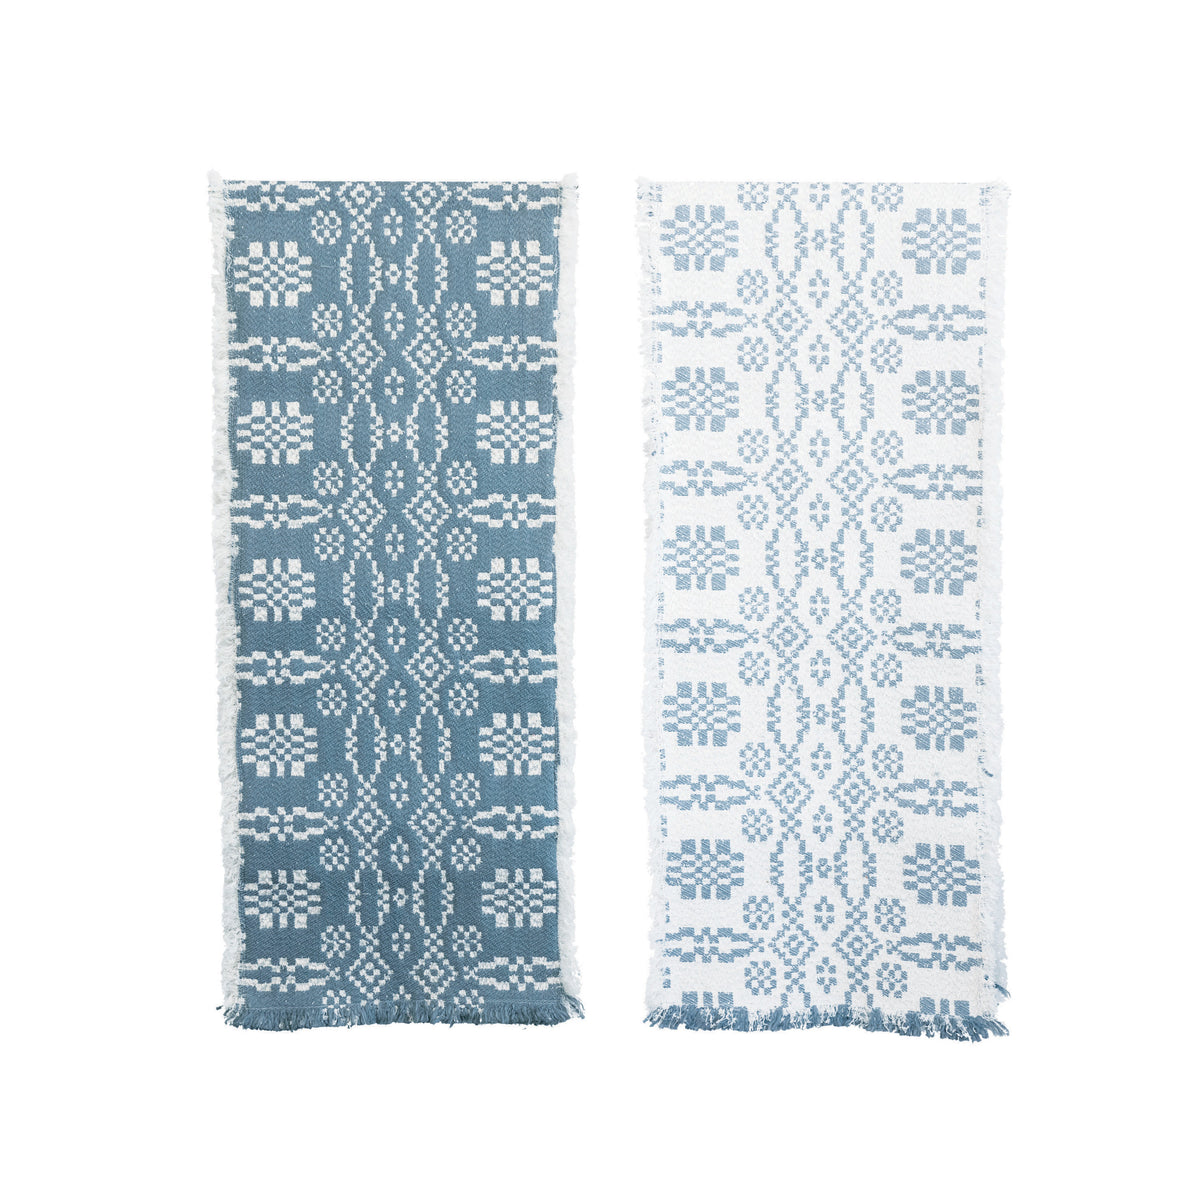 Woven Cotton Two-Sided Jacquard Table Runner with Frayed Edges